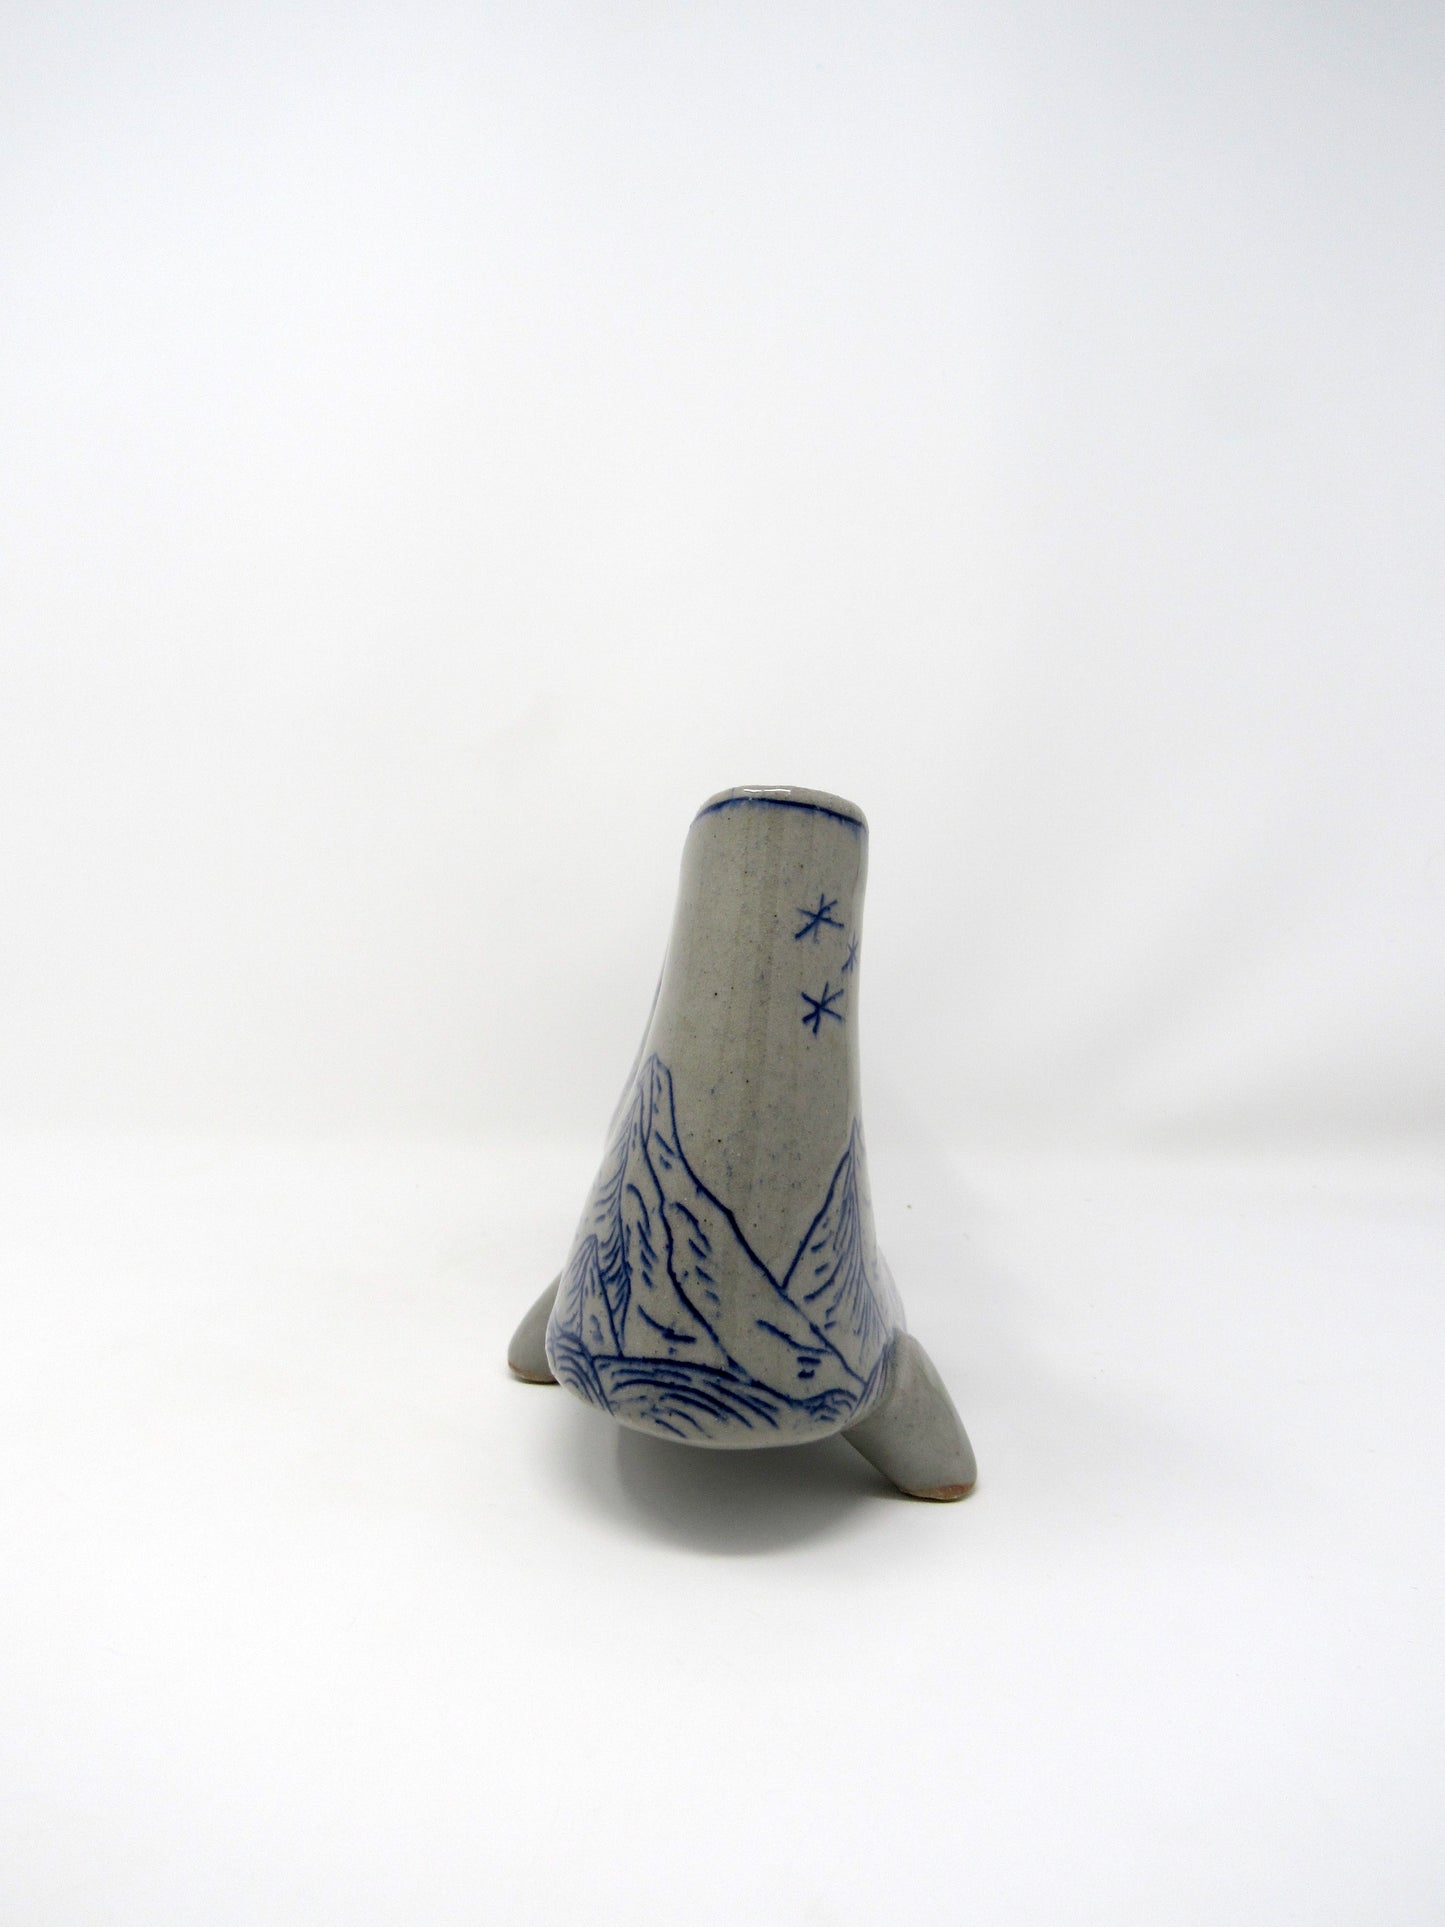 Mountain Landscape Vase with Feet in Blue and Gray